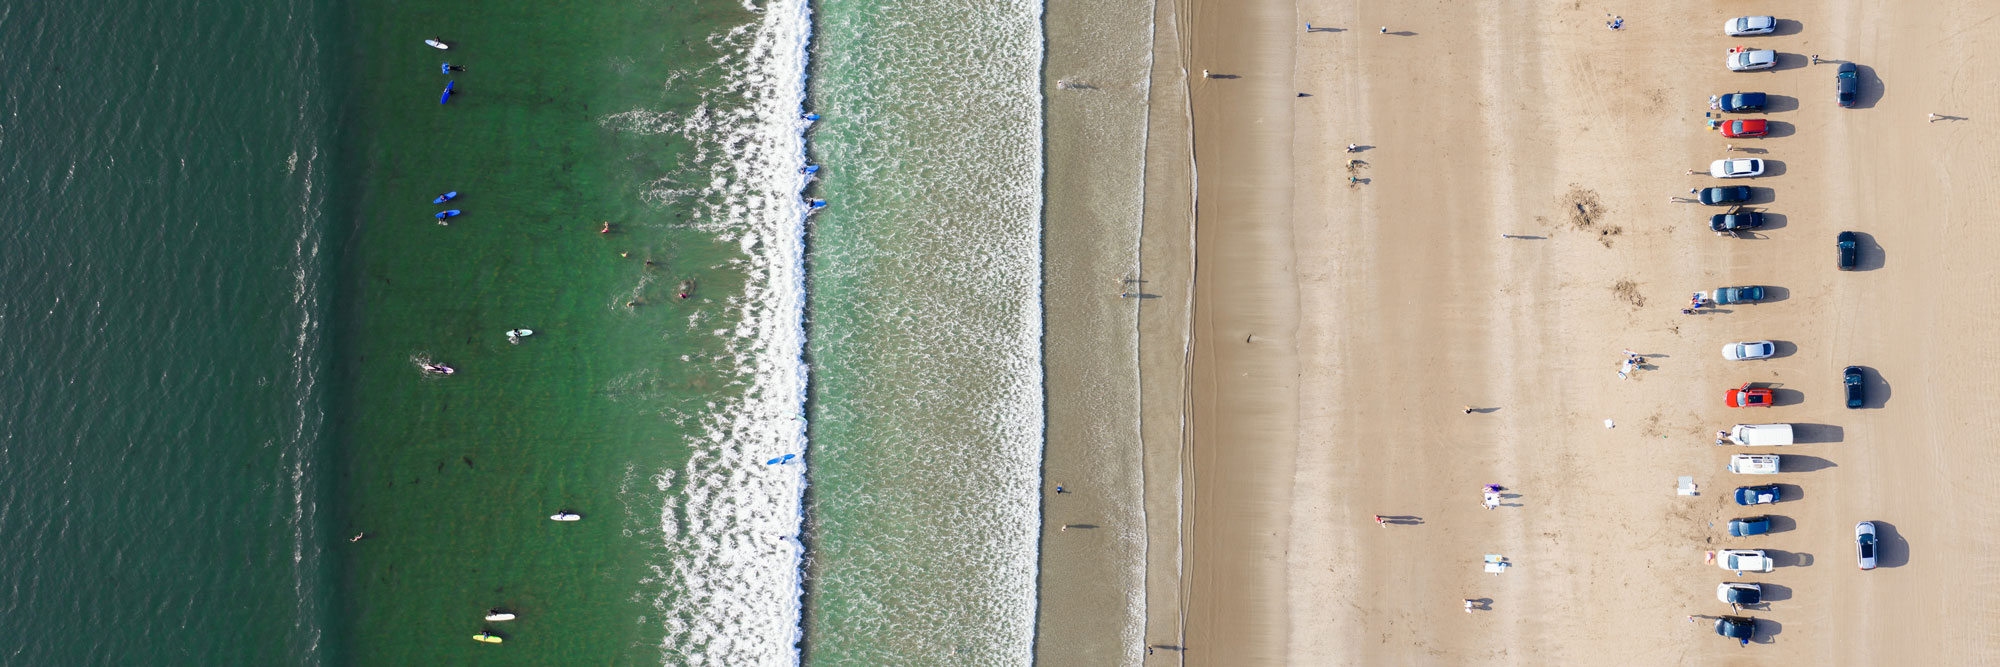 Aerial of surfers riding a wave at inch beach in Ireland